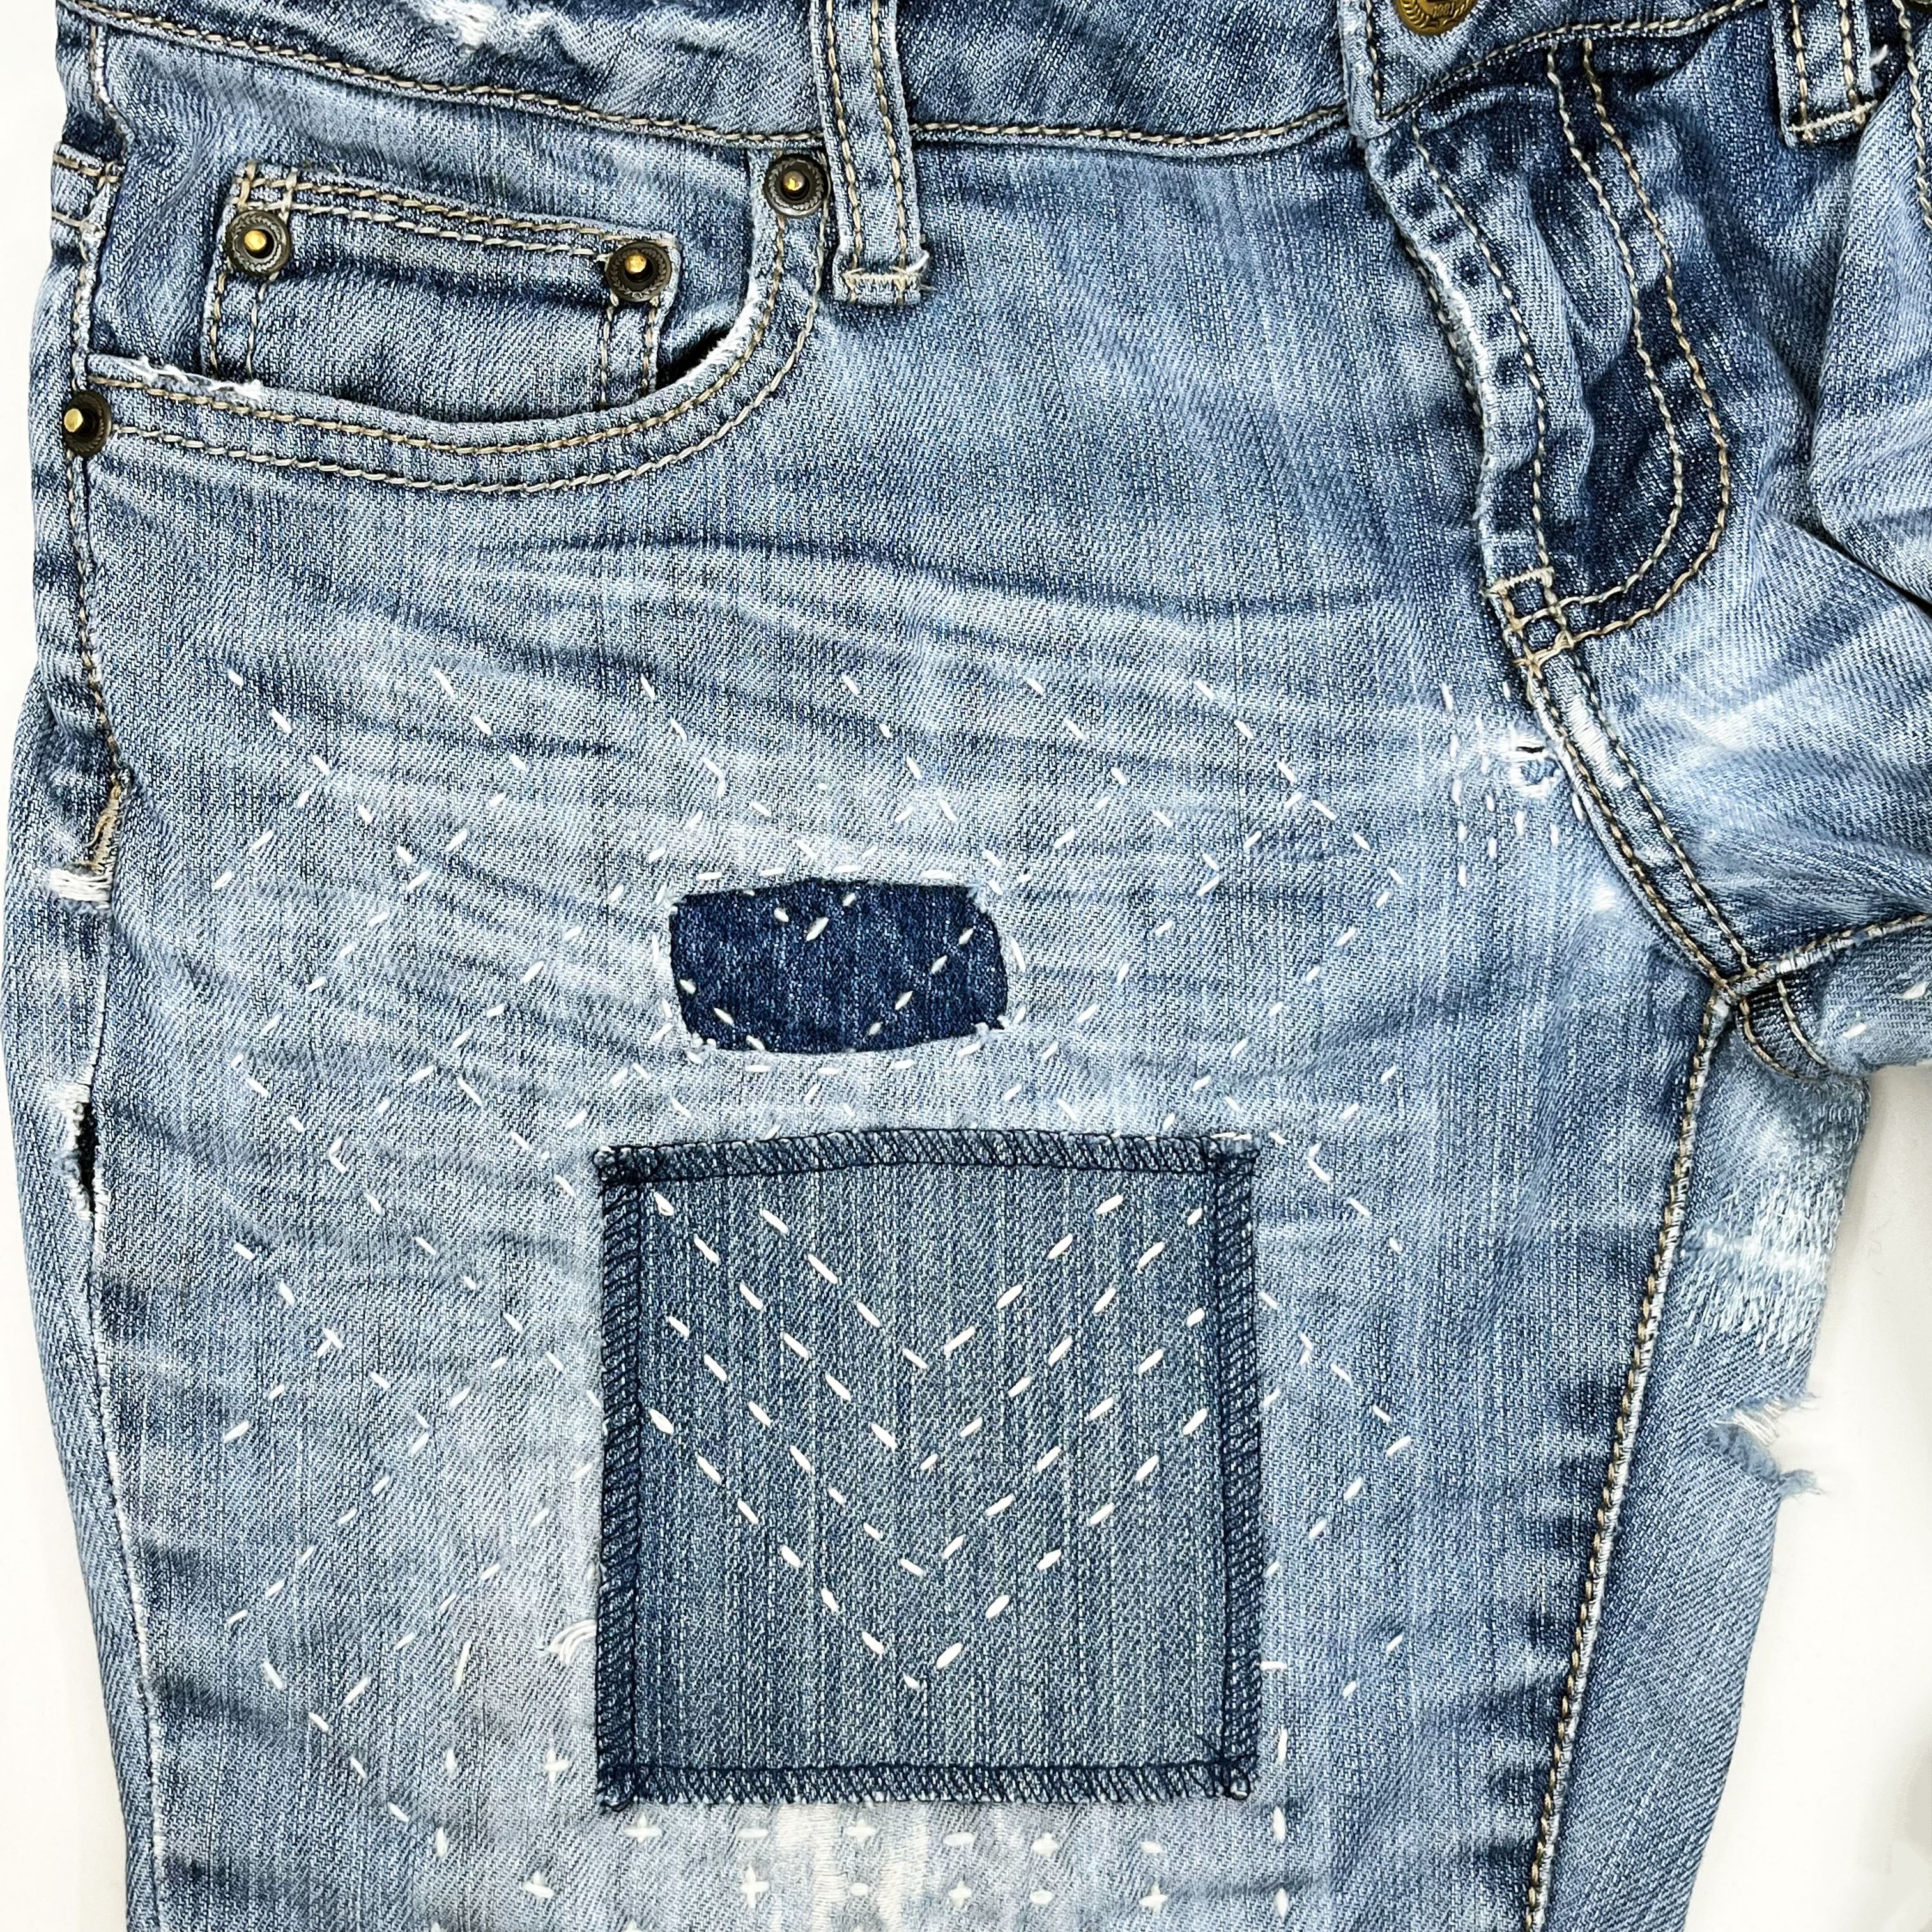 Square Patch with Embroidered Chevrons